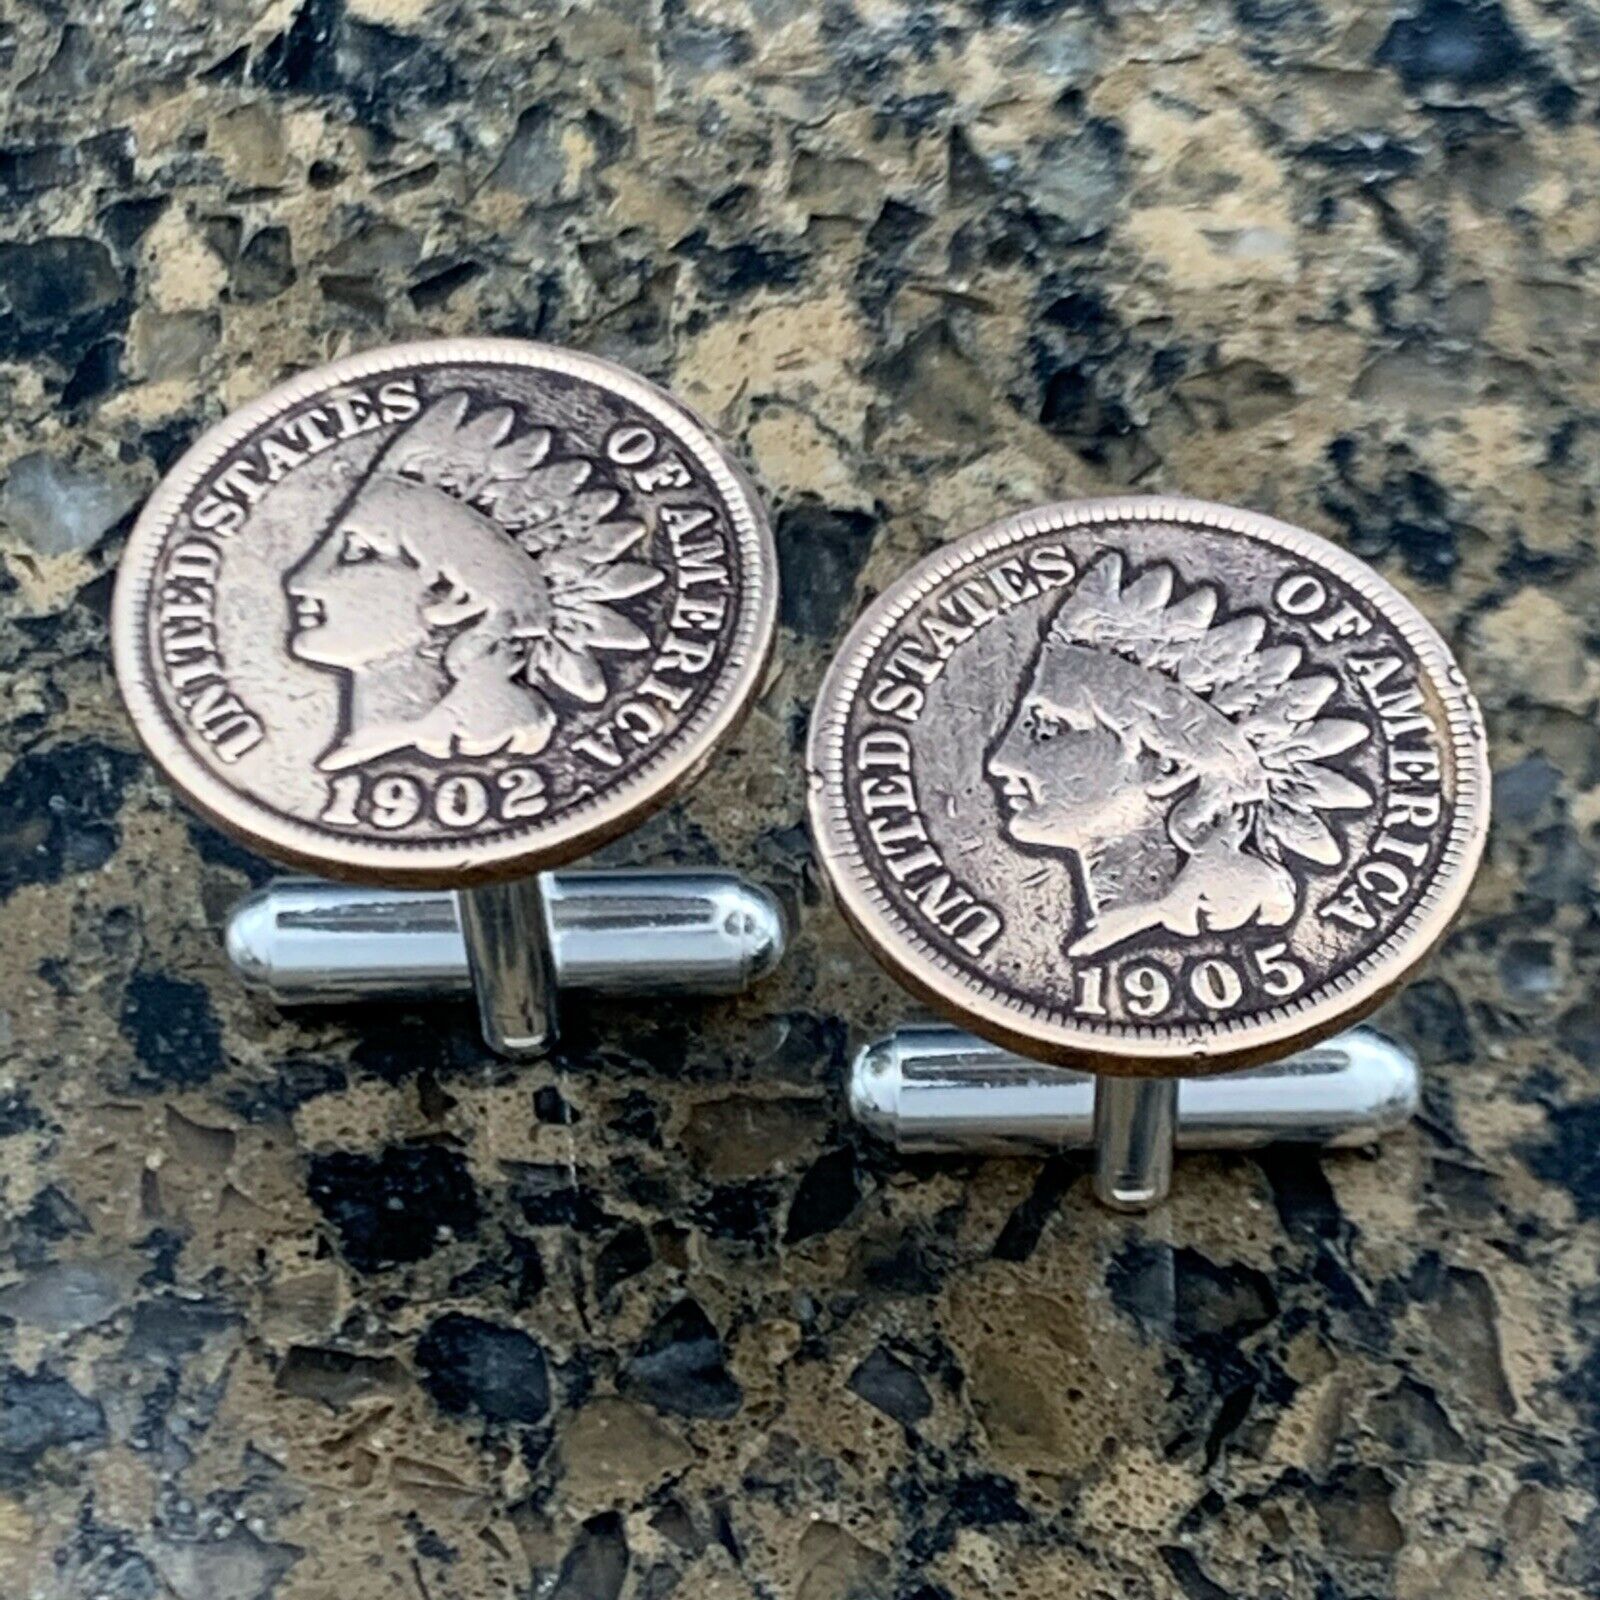 New Cufflinks Antique Vintage Indian Head 100 Year Penny Coin Currency Americana